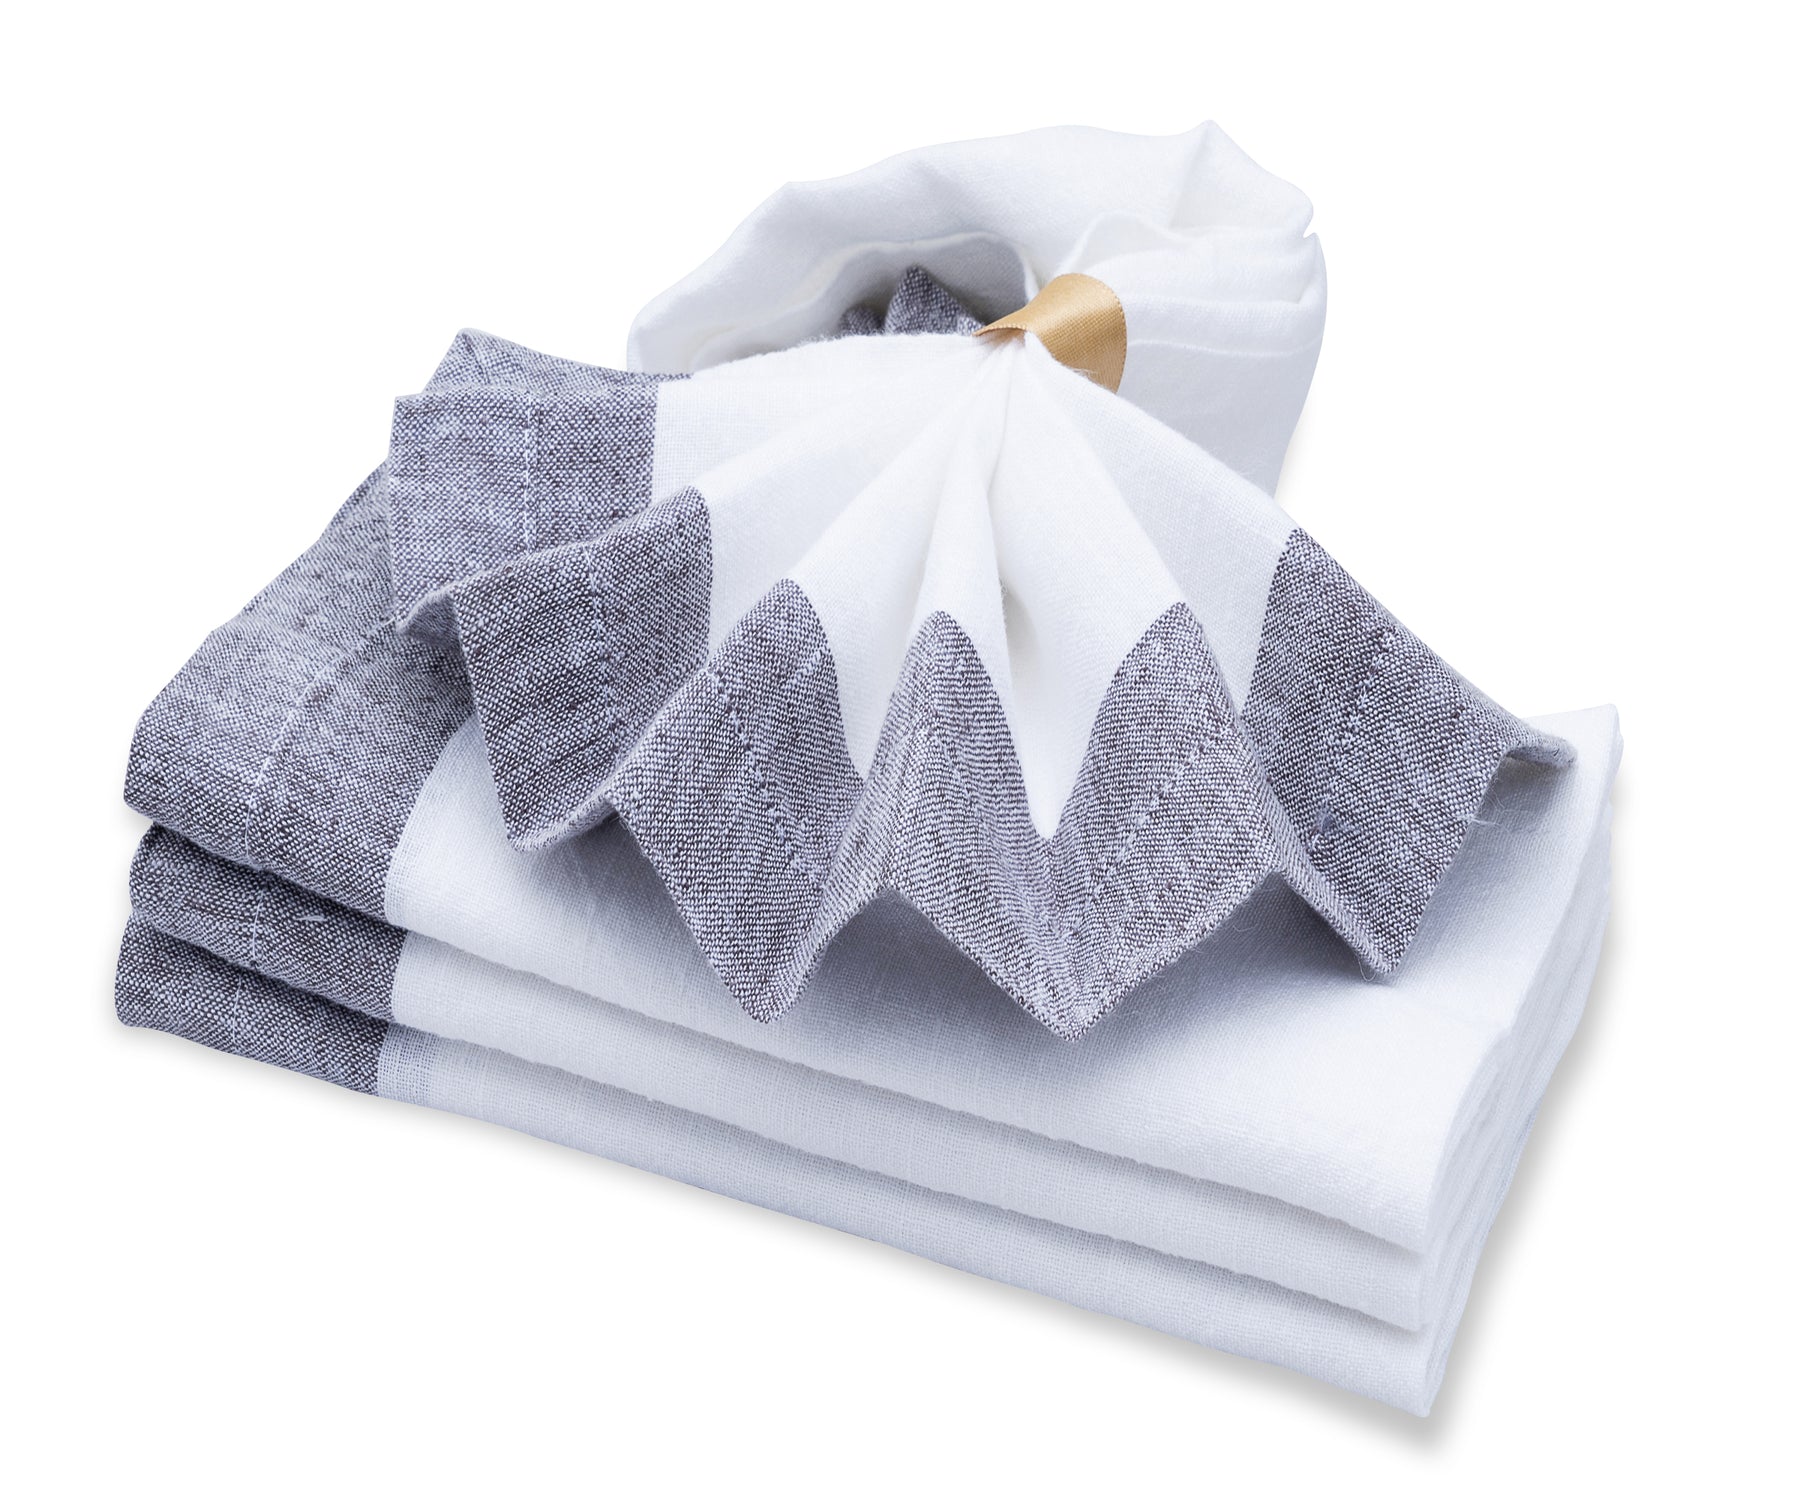 Soft white cotton napkins proving simplicity at its best